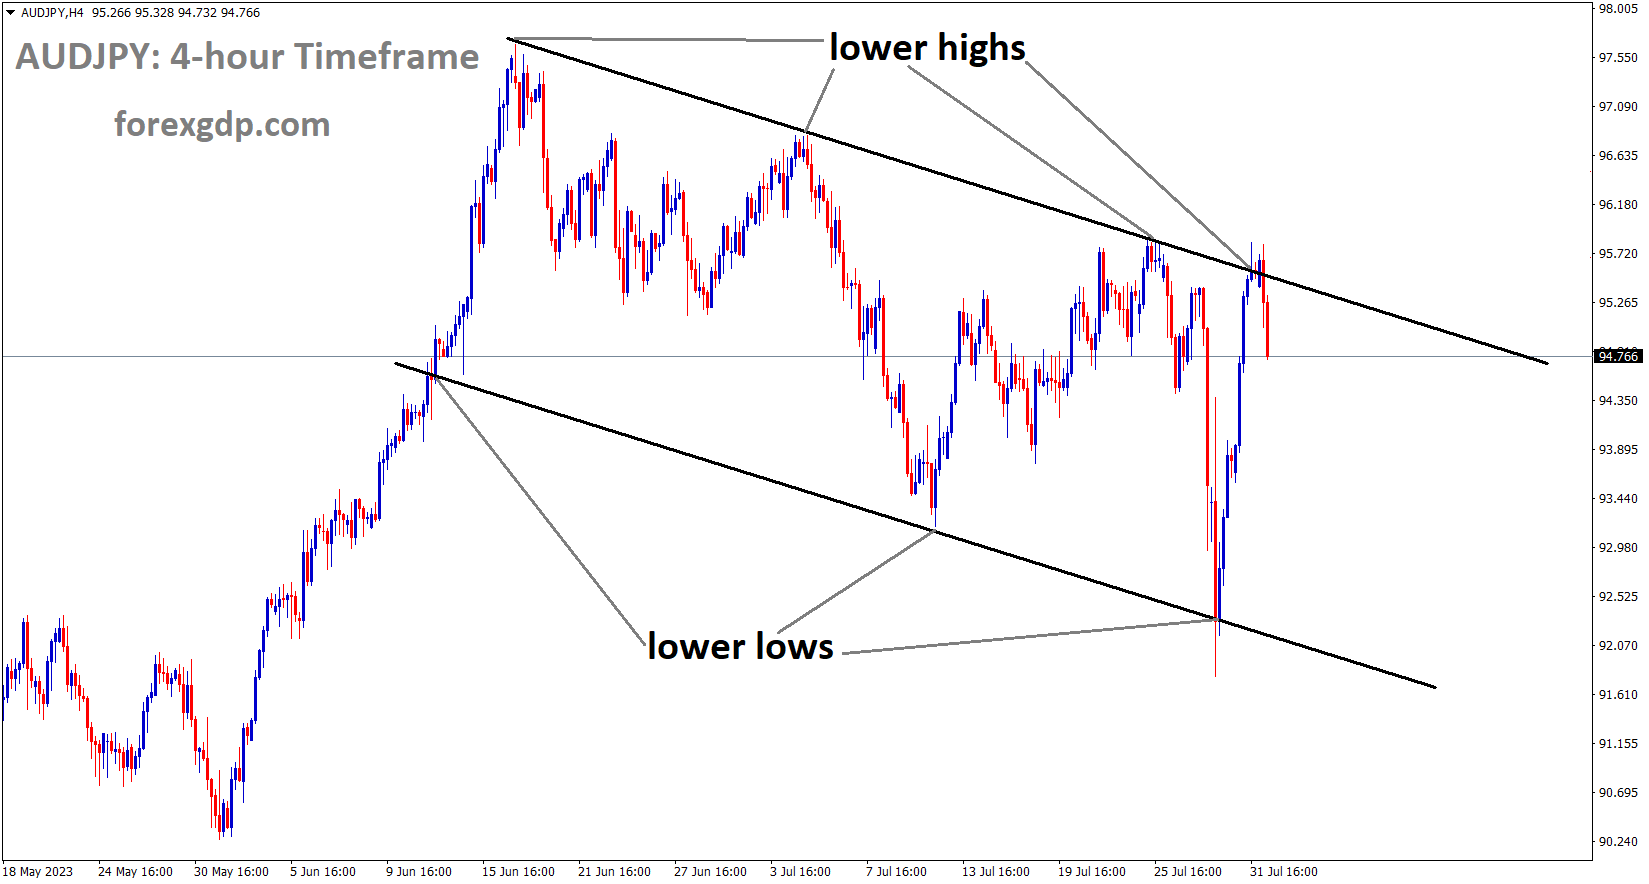 AUDJPY is moving in the Descending channel and the market has fallen from the lower high area of the pattern